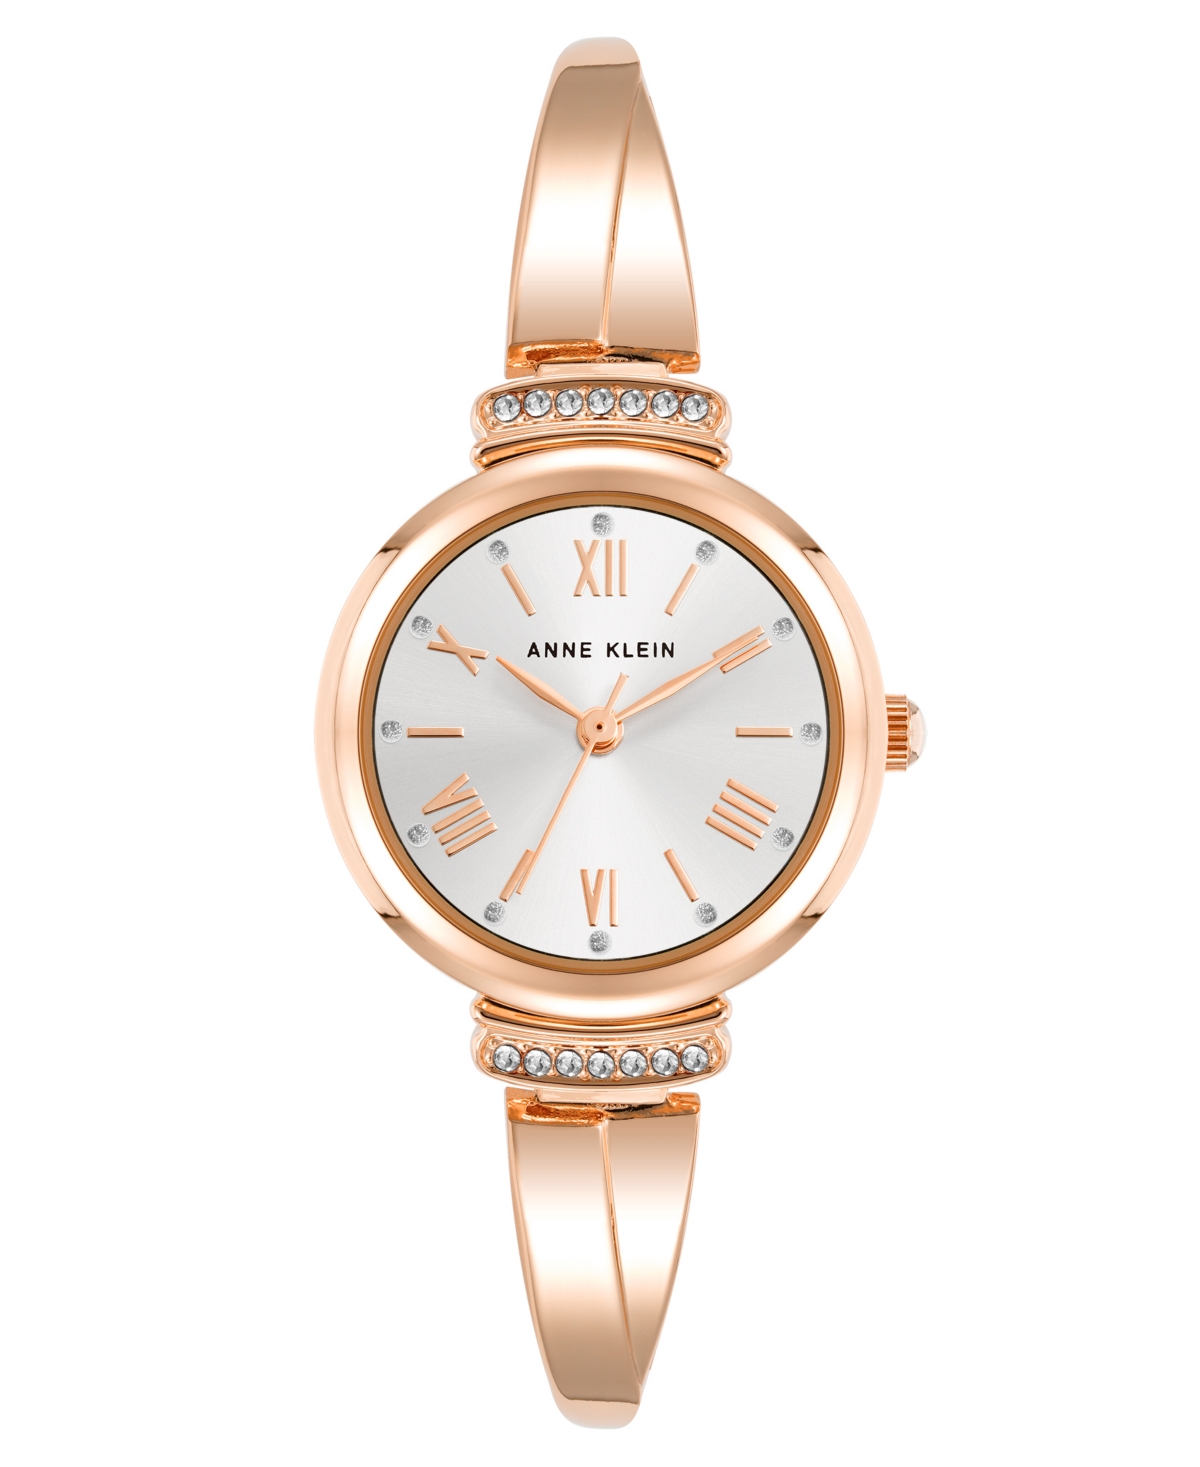 Anne Klein Women's Three Hand Quartz Rose Gold-tone Alloy With Crystal Accents Bangle Watch, 26mm